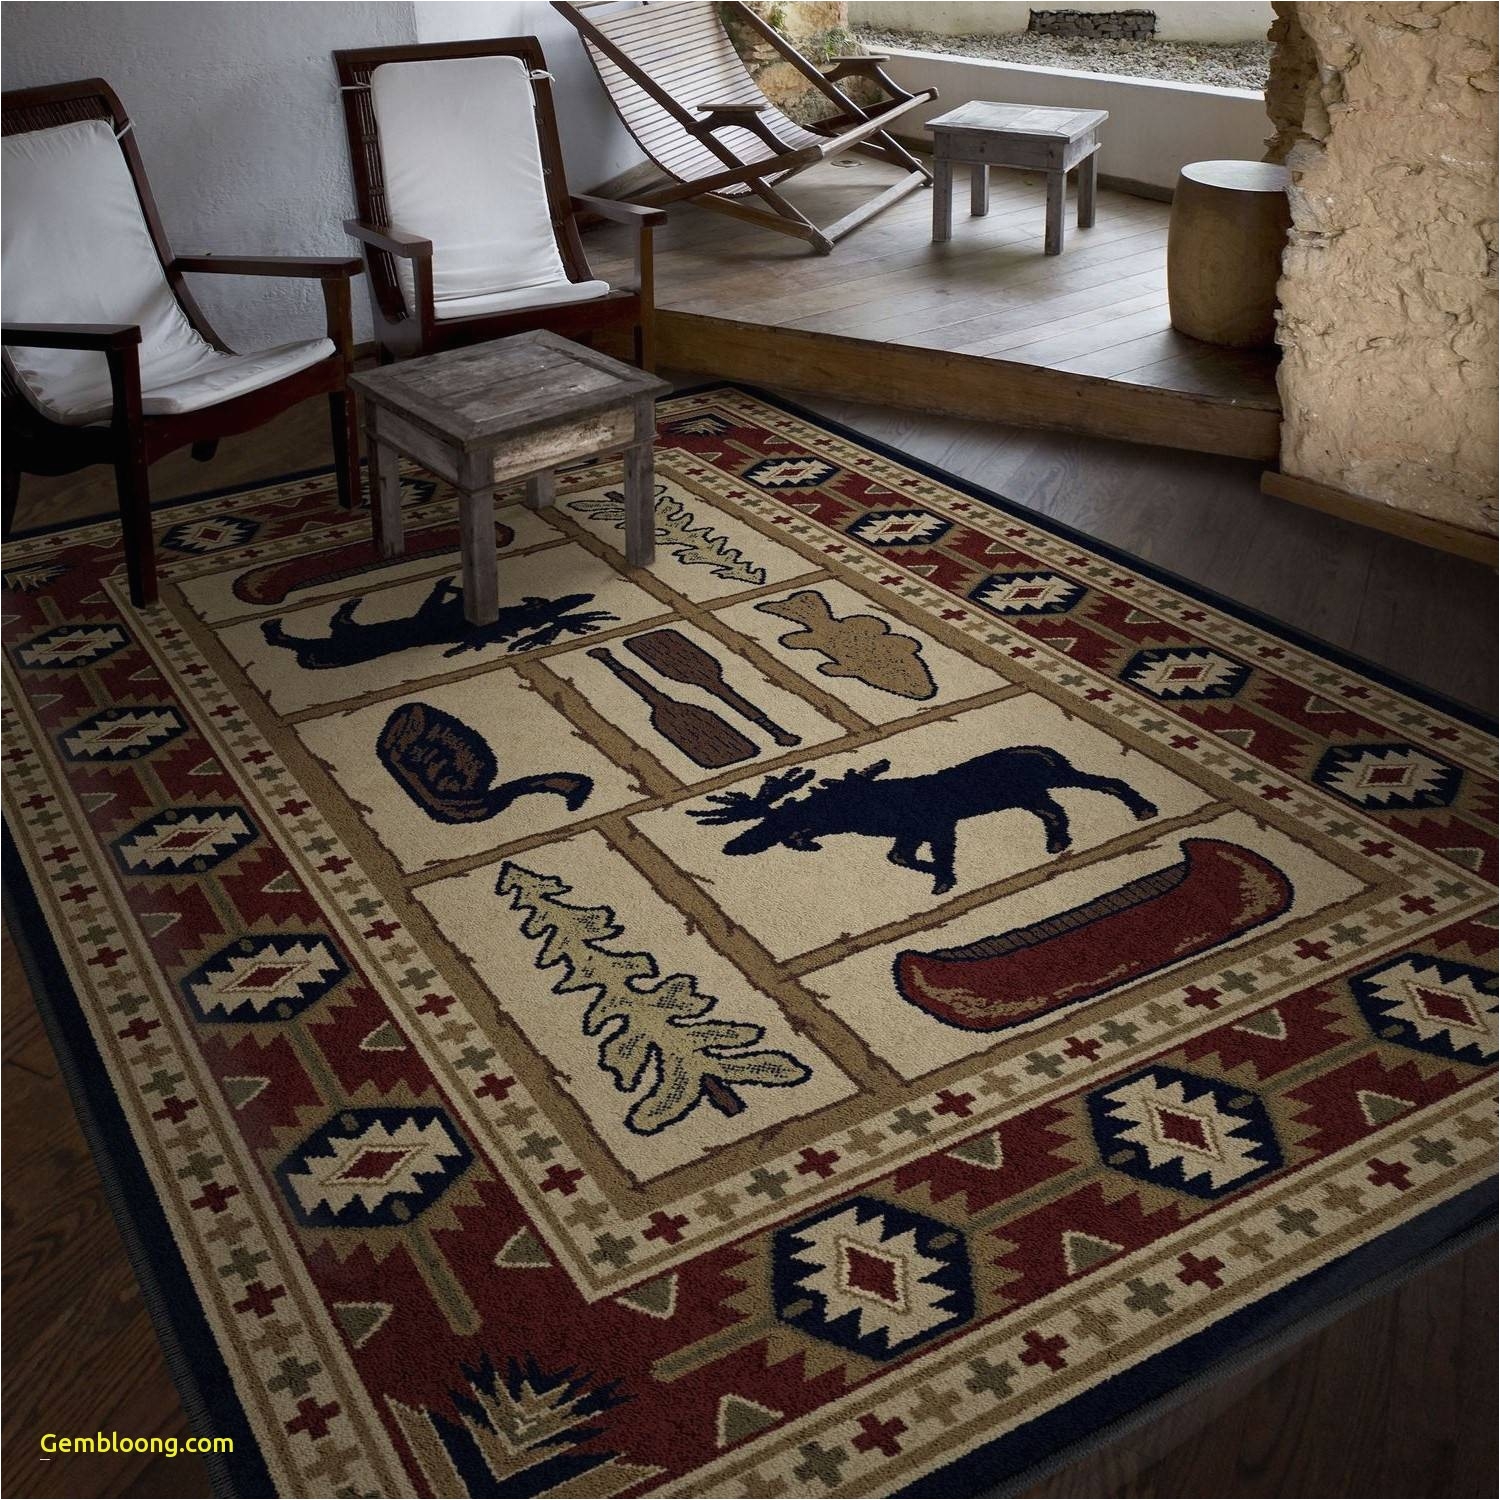 full size of home design outdoor patio rug inspirational furniture design brown rugs lovely 7 large size of home design outdoor patio rug inspirational